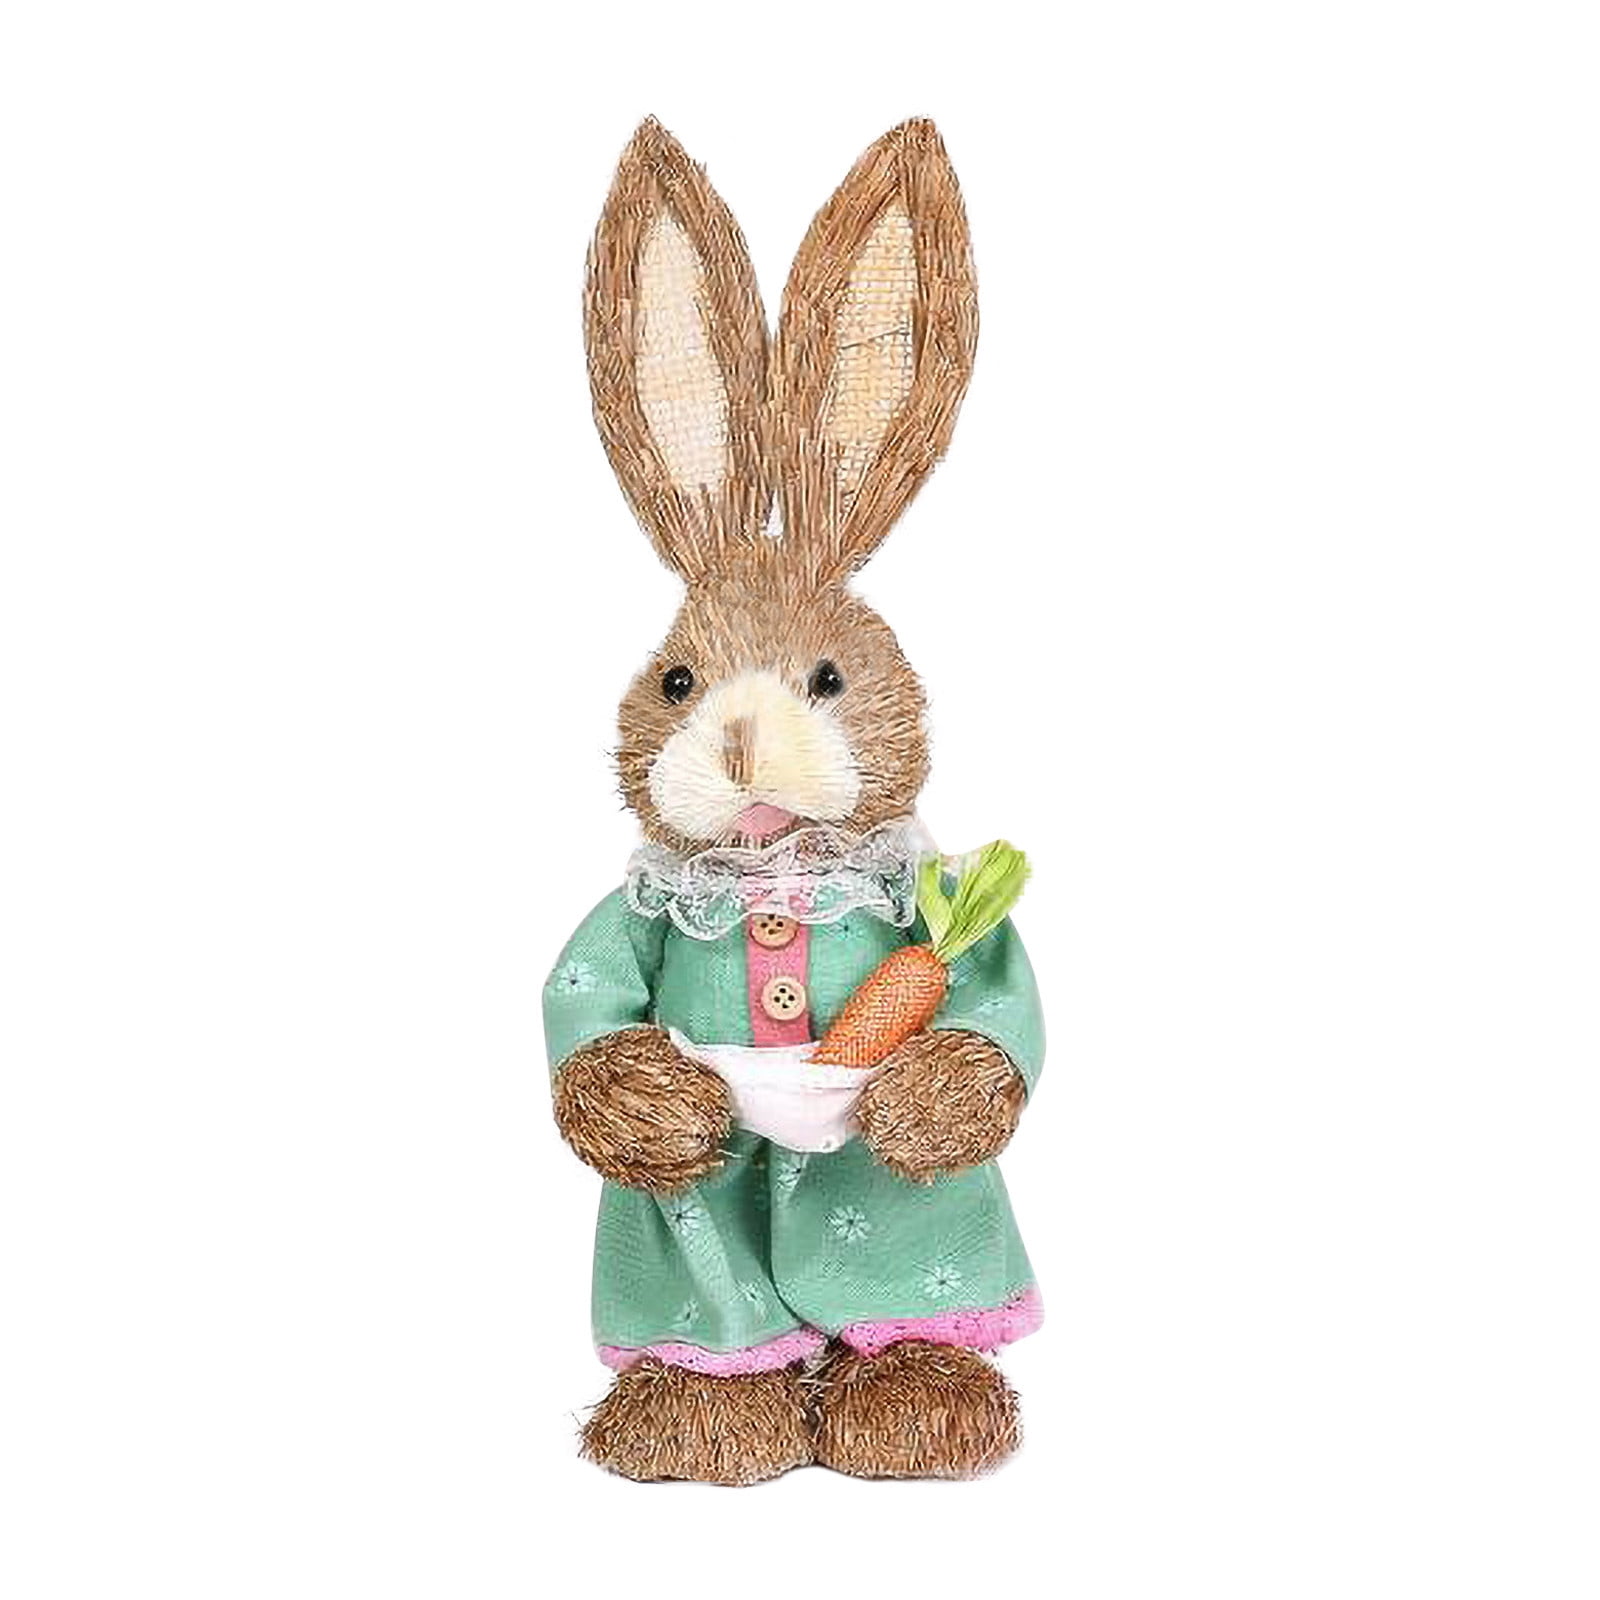 Details about   Easter Cute Bunny Rabbit Decoration New Natural Sisal Gift Spring Fiber NE S6N3 